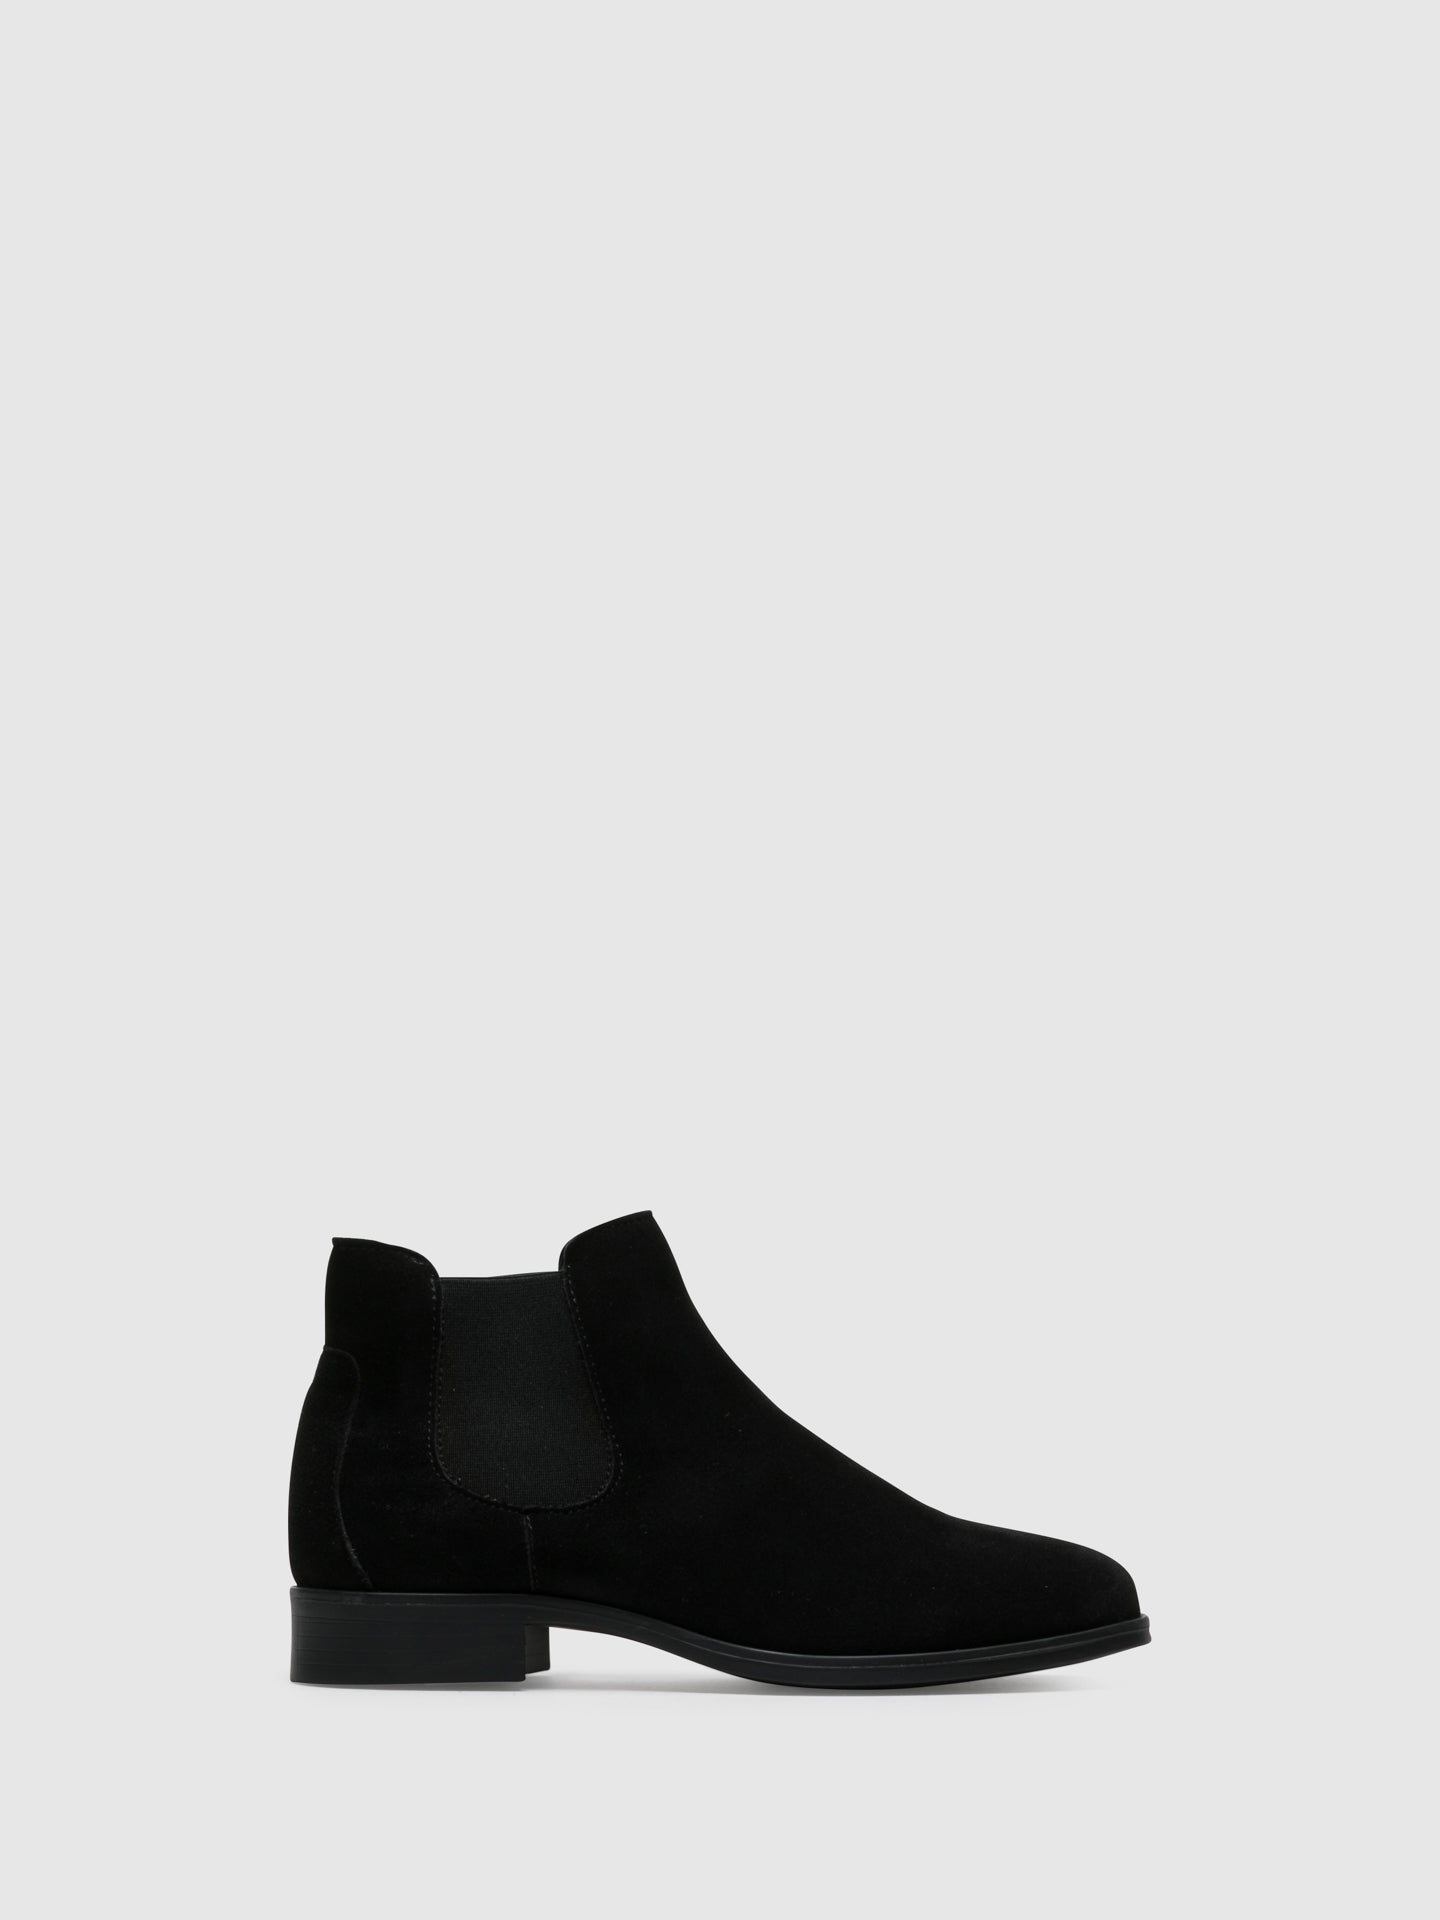 Foreva Black Suede Elasticated Ankle Boots